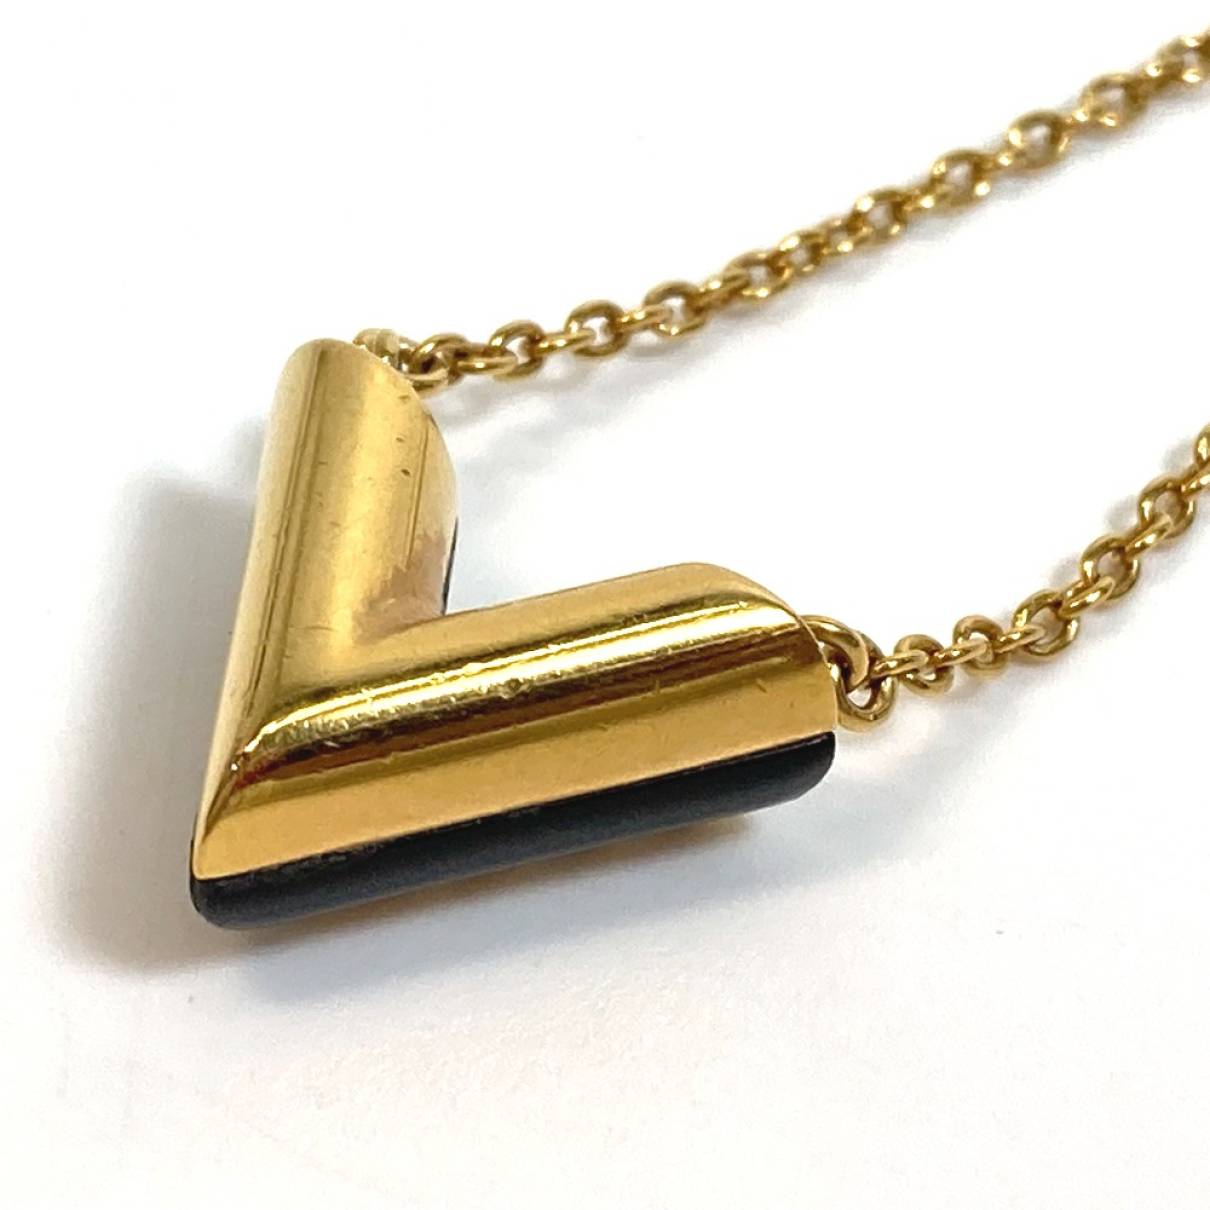 Essential v necklace Louis Vuitton Gold in Metal - 33240938